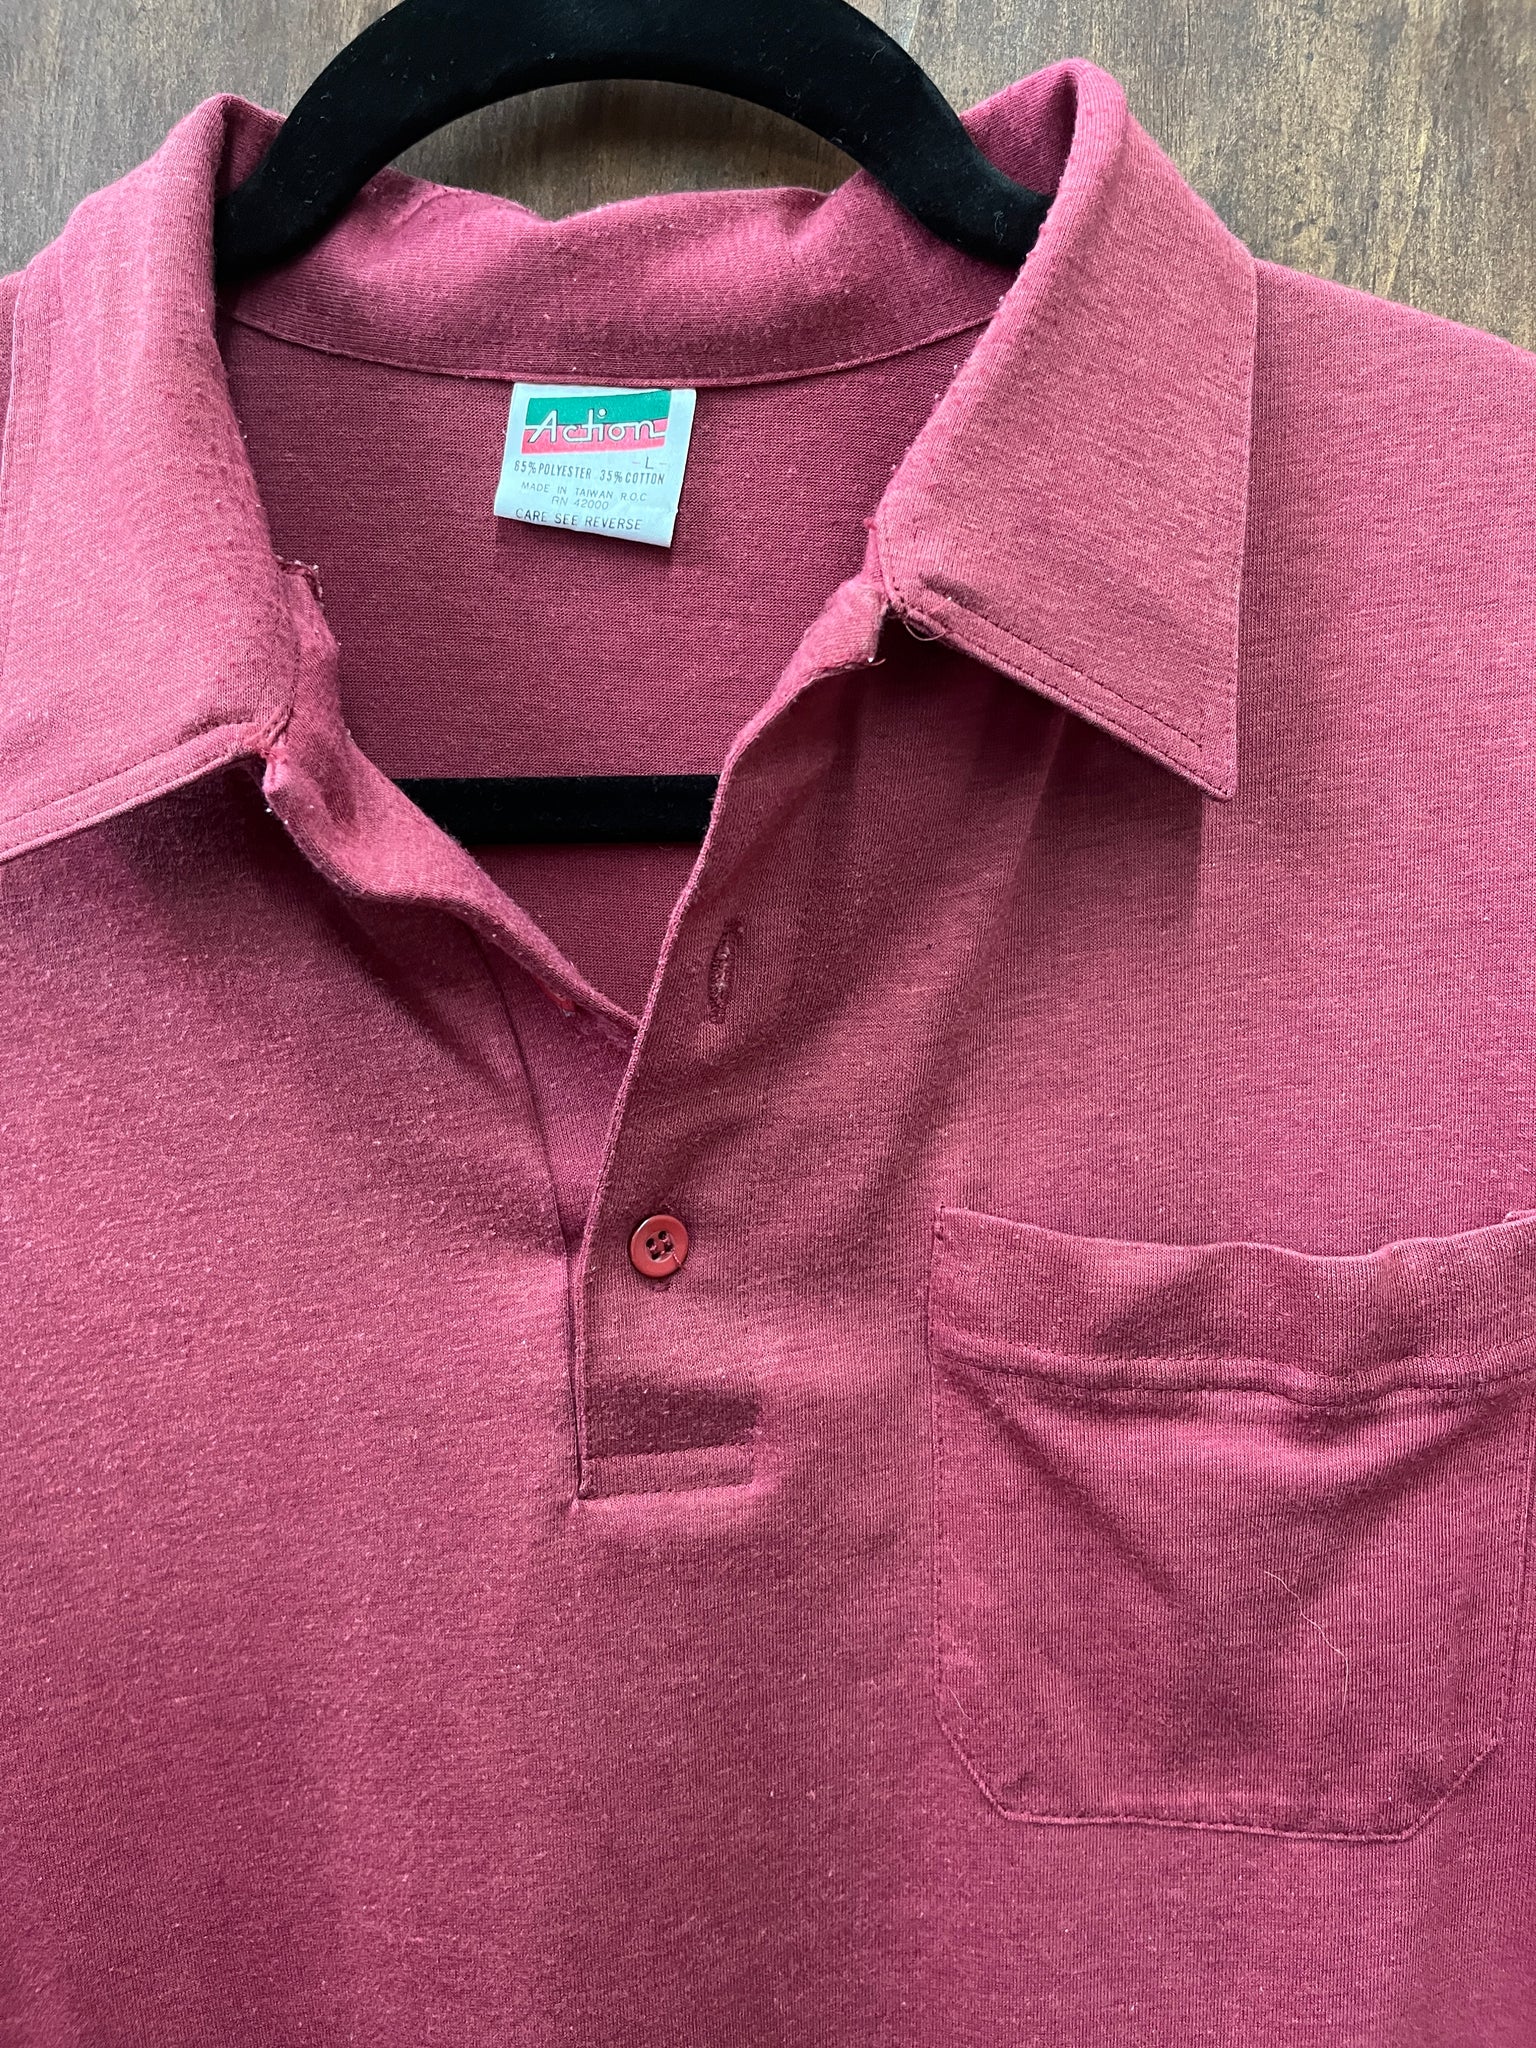 1990s T SHIRT-POLO- Action- burgundy with pocket